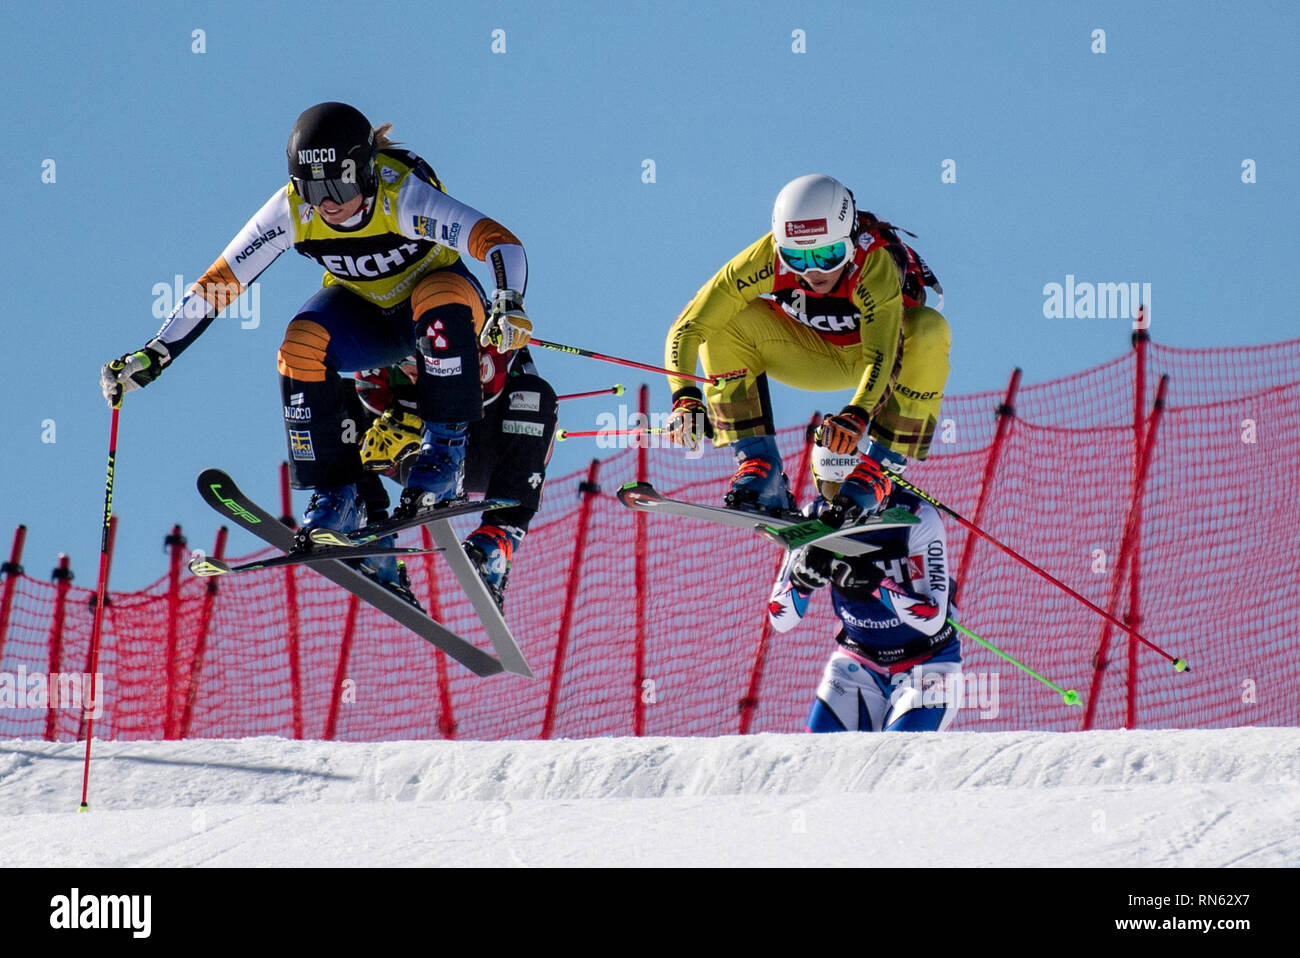 Feldberg, Germany. 17th Feb, 2019. Ski Cross: World Cup, quarter finals: Lisa Andersson (l-r) from Sweden, Brittany Phelan from Canada, Daniela Maier from Germany and Alizee Baron from France. Credit: Patrick Seeger/dpa/Alamy Live News Stock Photo